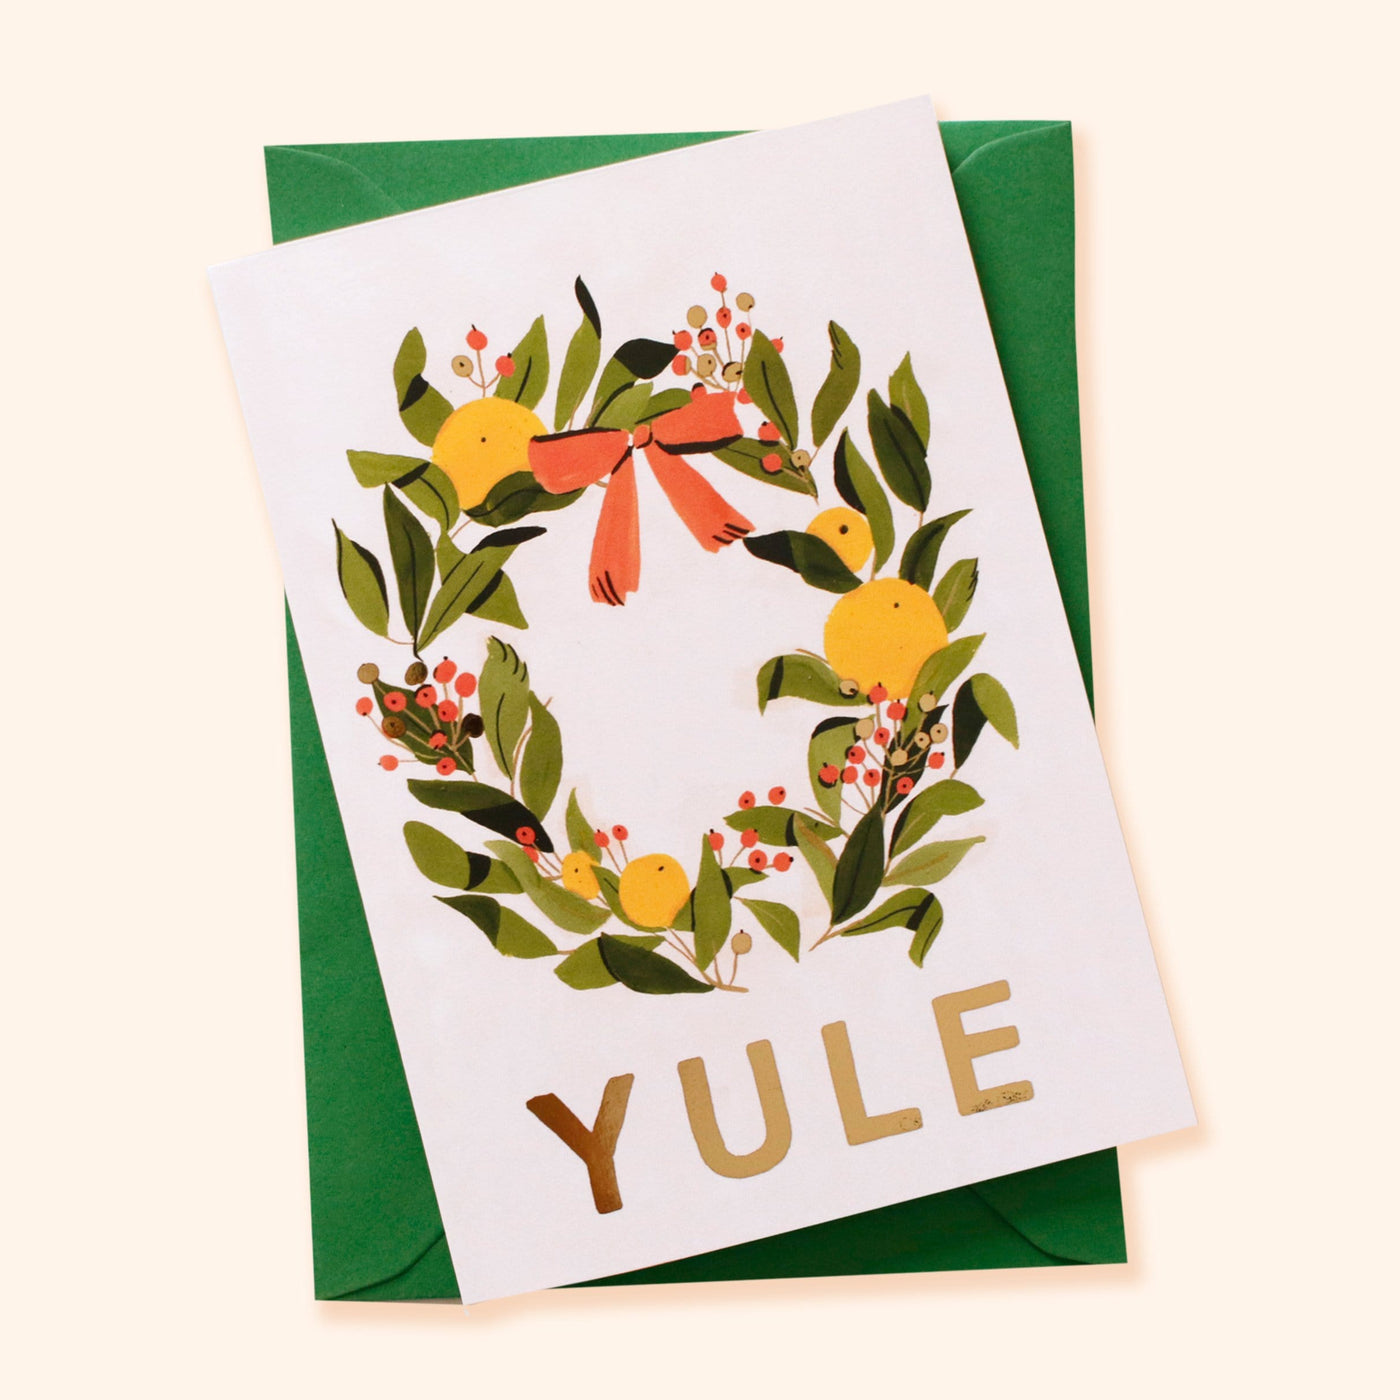 Illustrated Christmas Wreath A6 White Card With Gold Yule Lettering With Green Envelope - Annie Dornan Smith